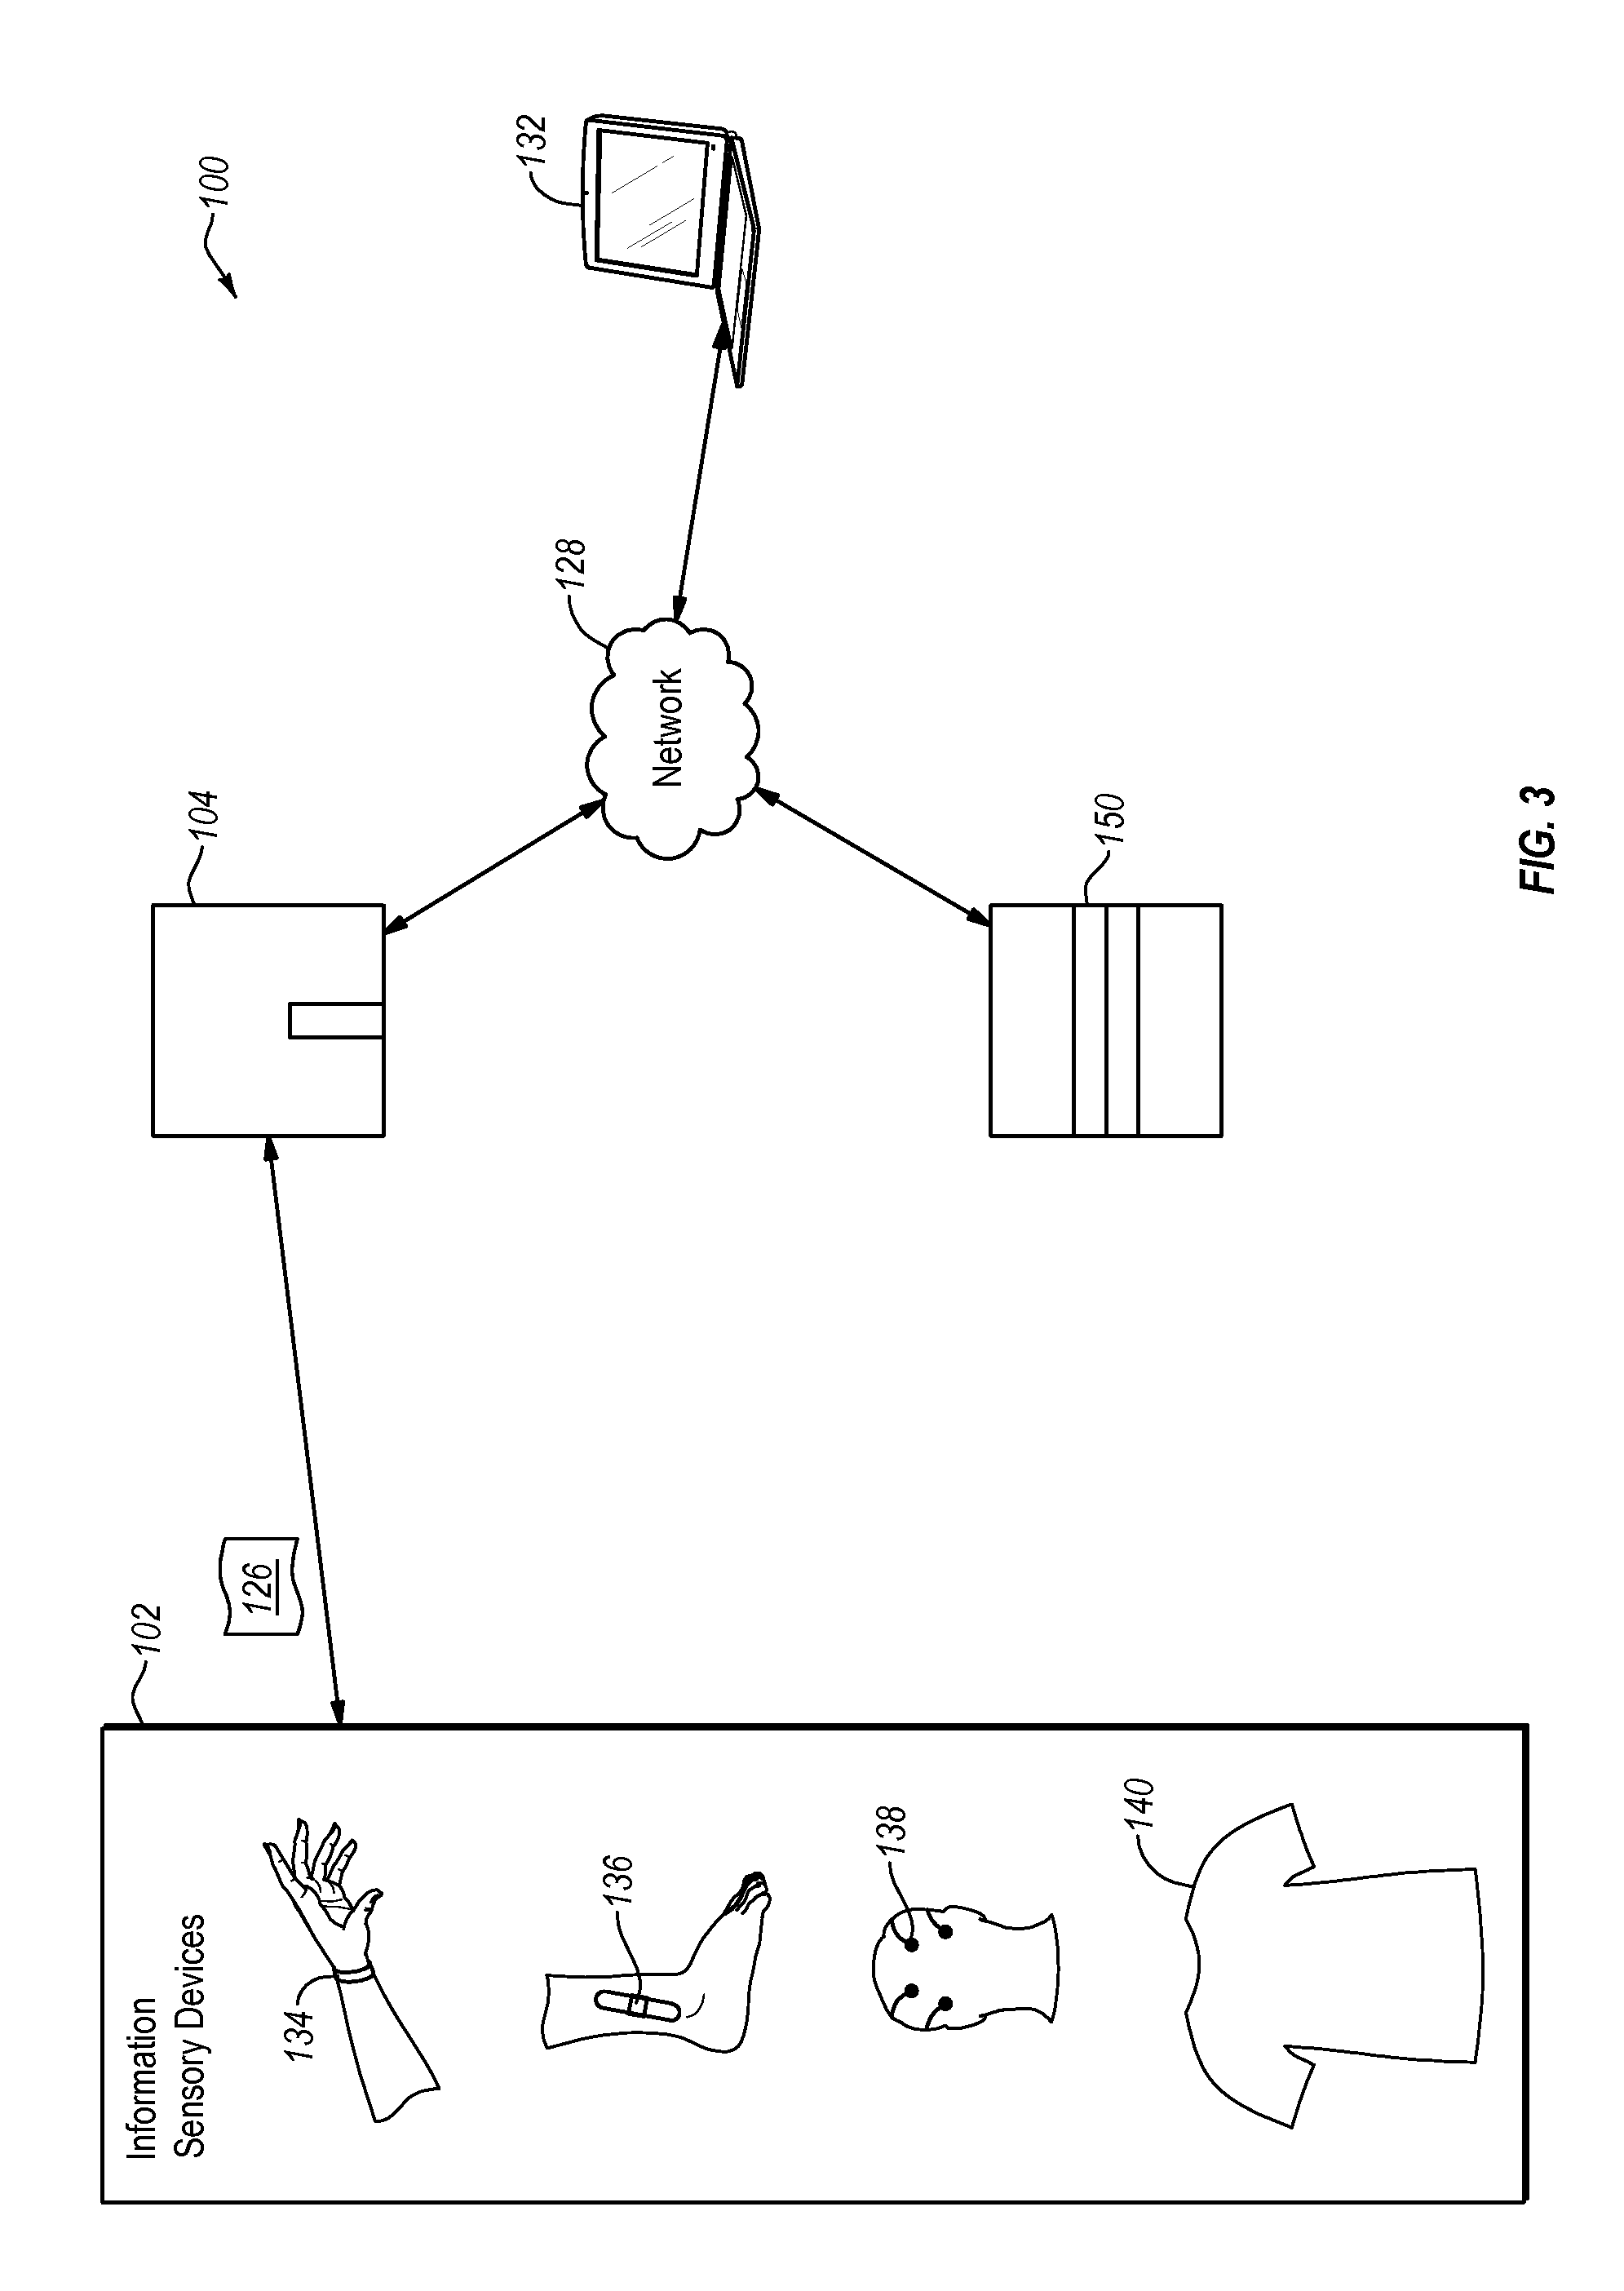 Systems, methods, and devices for dispensing one or more substances